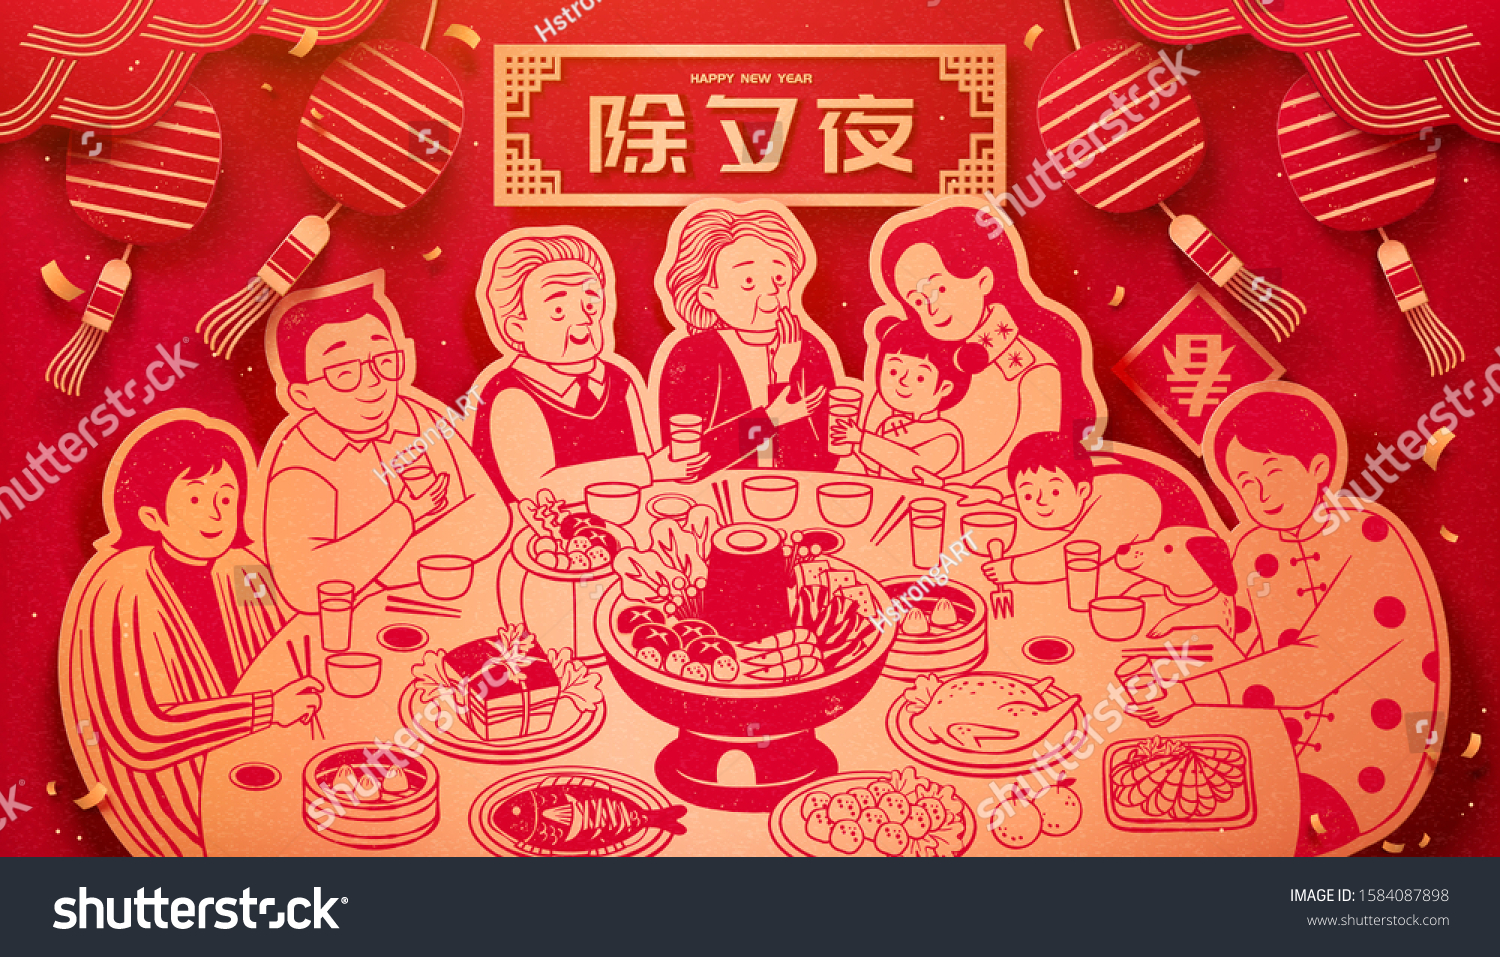 SVG of Extended family lively reunion dinner in gold and red with hanging lanterns background, Chinese text translation: spring and new year's eve svg